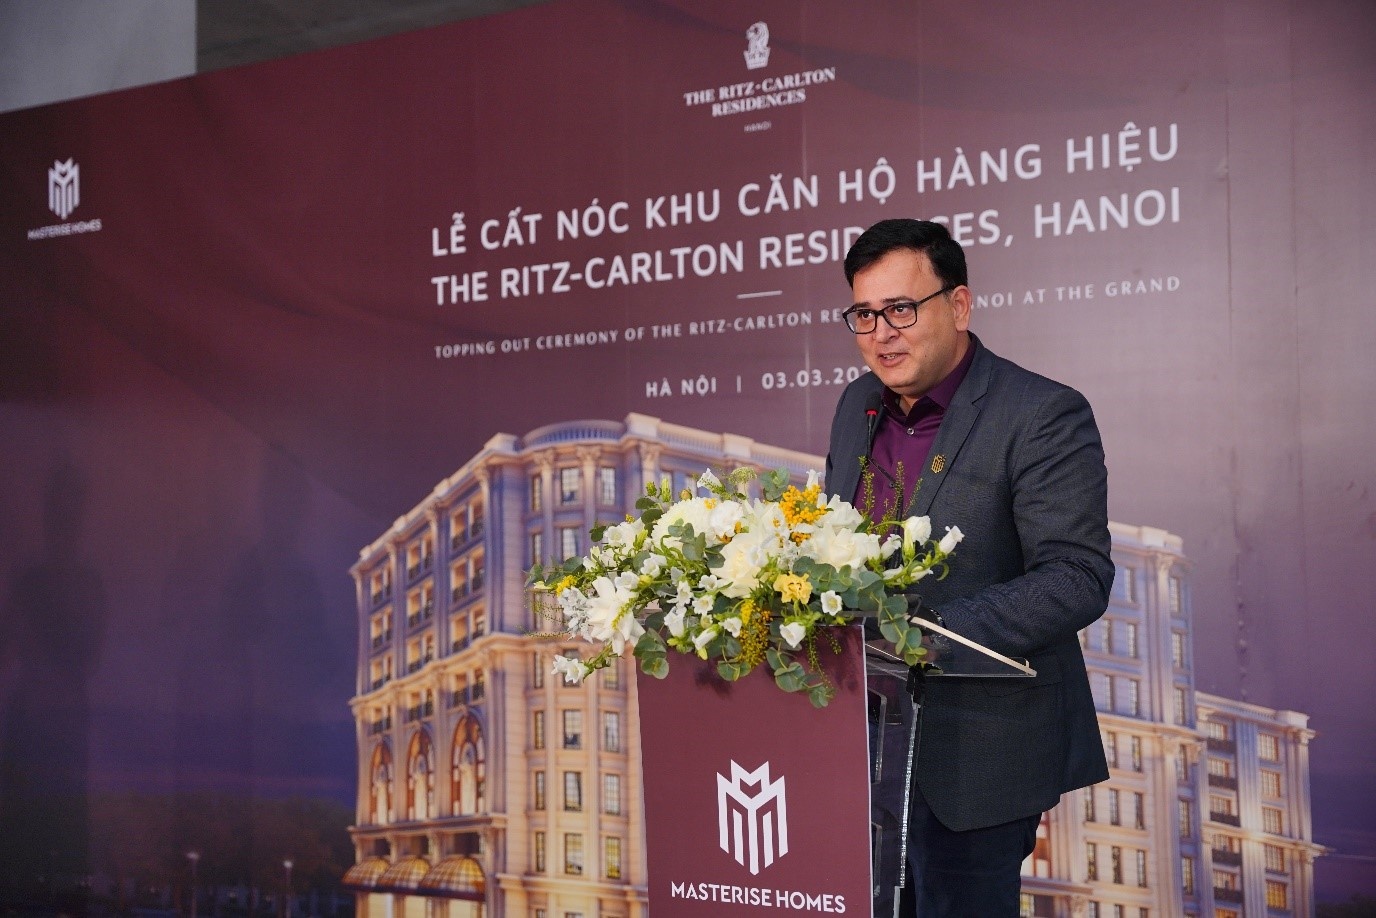 Topping out ceremony for The Ritz-Carlton Residences, Hanoi